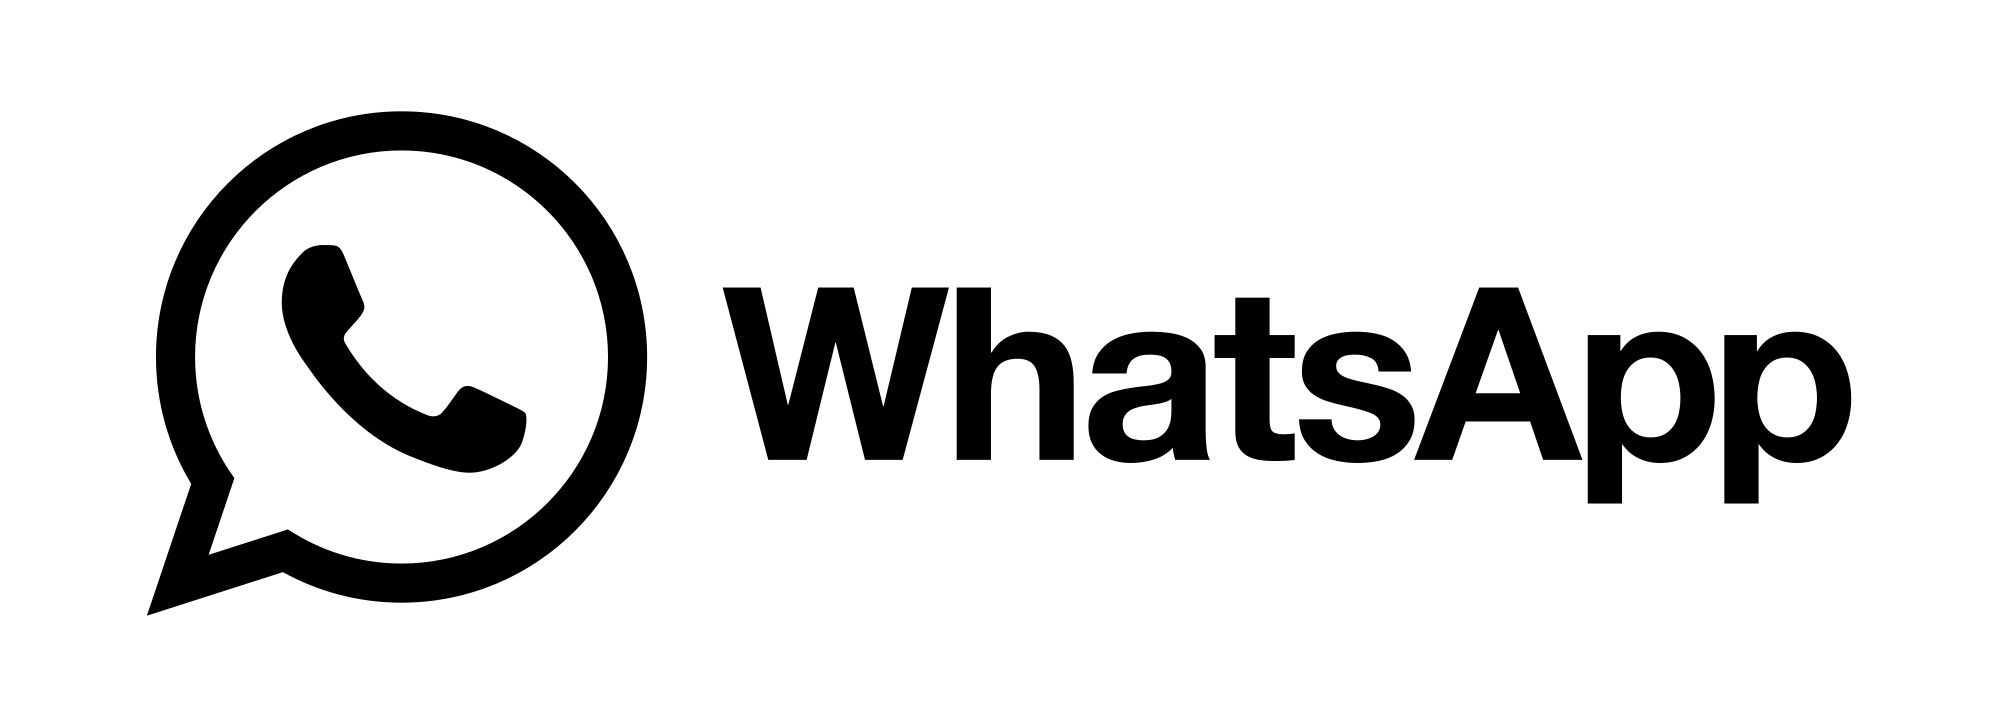 Whatsapp Logo And Brand Icons Png Free Png And Icons Downloads